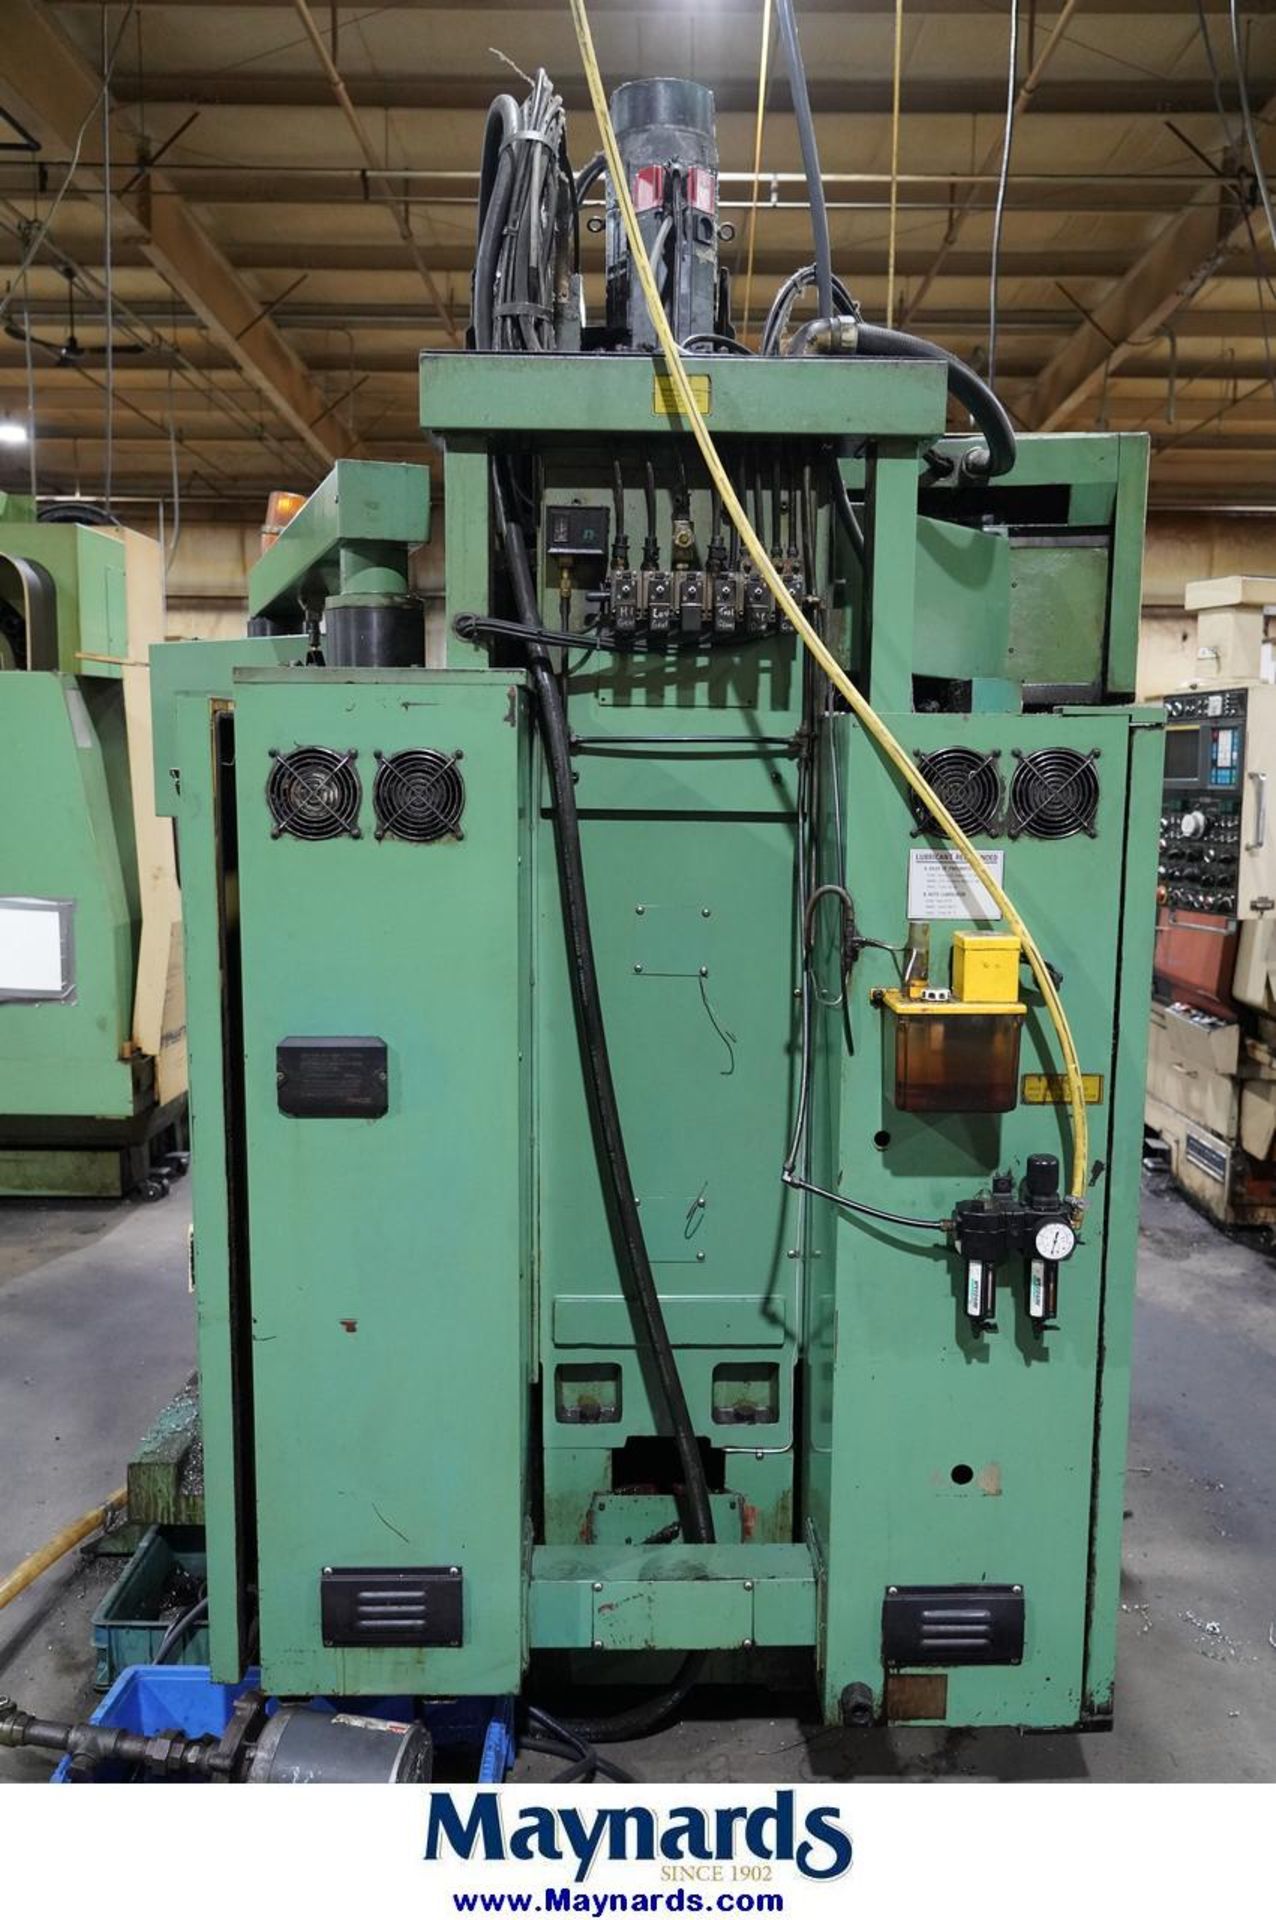 1986 Leadwell MCV-610D CNC Vertical Machining Center - Image 4 of 11